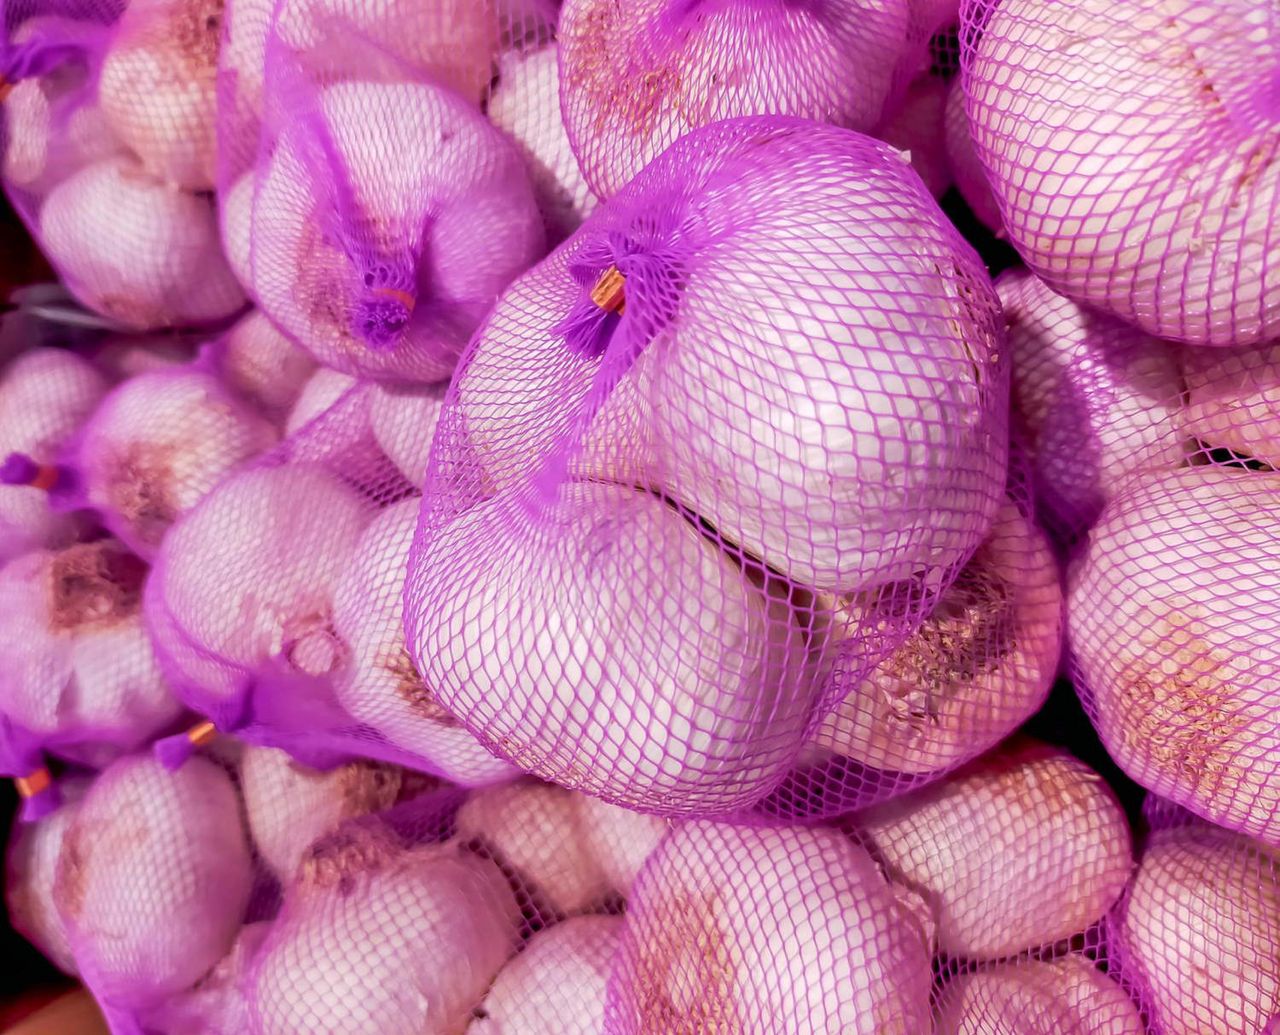 Do not combine garlic with these products.